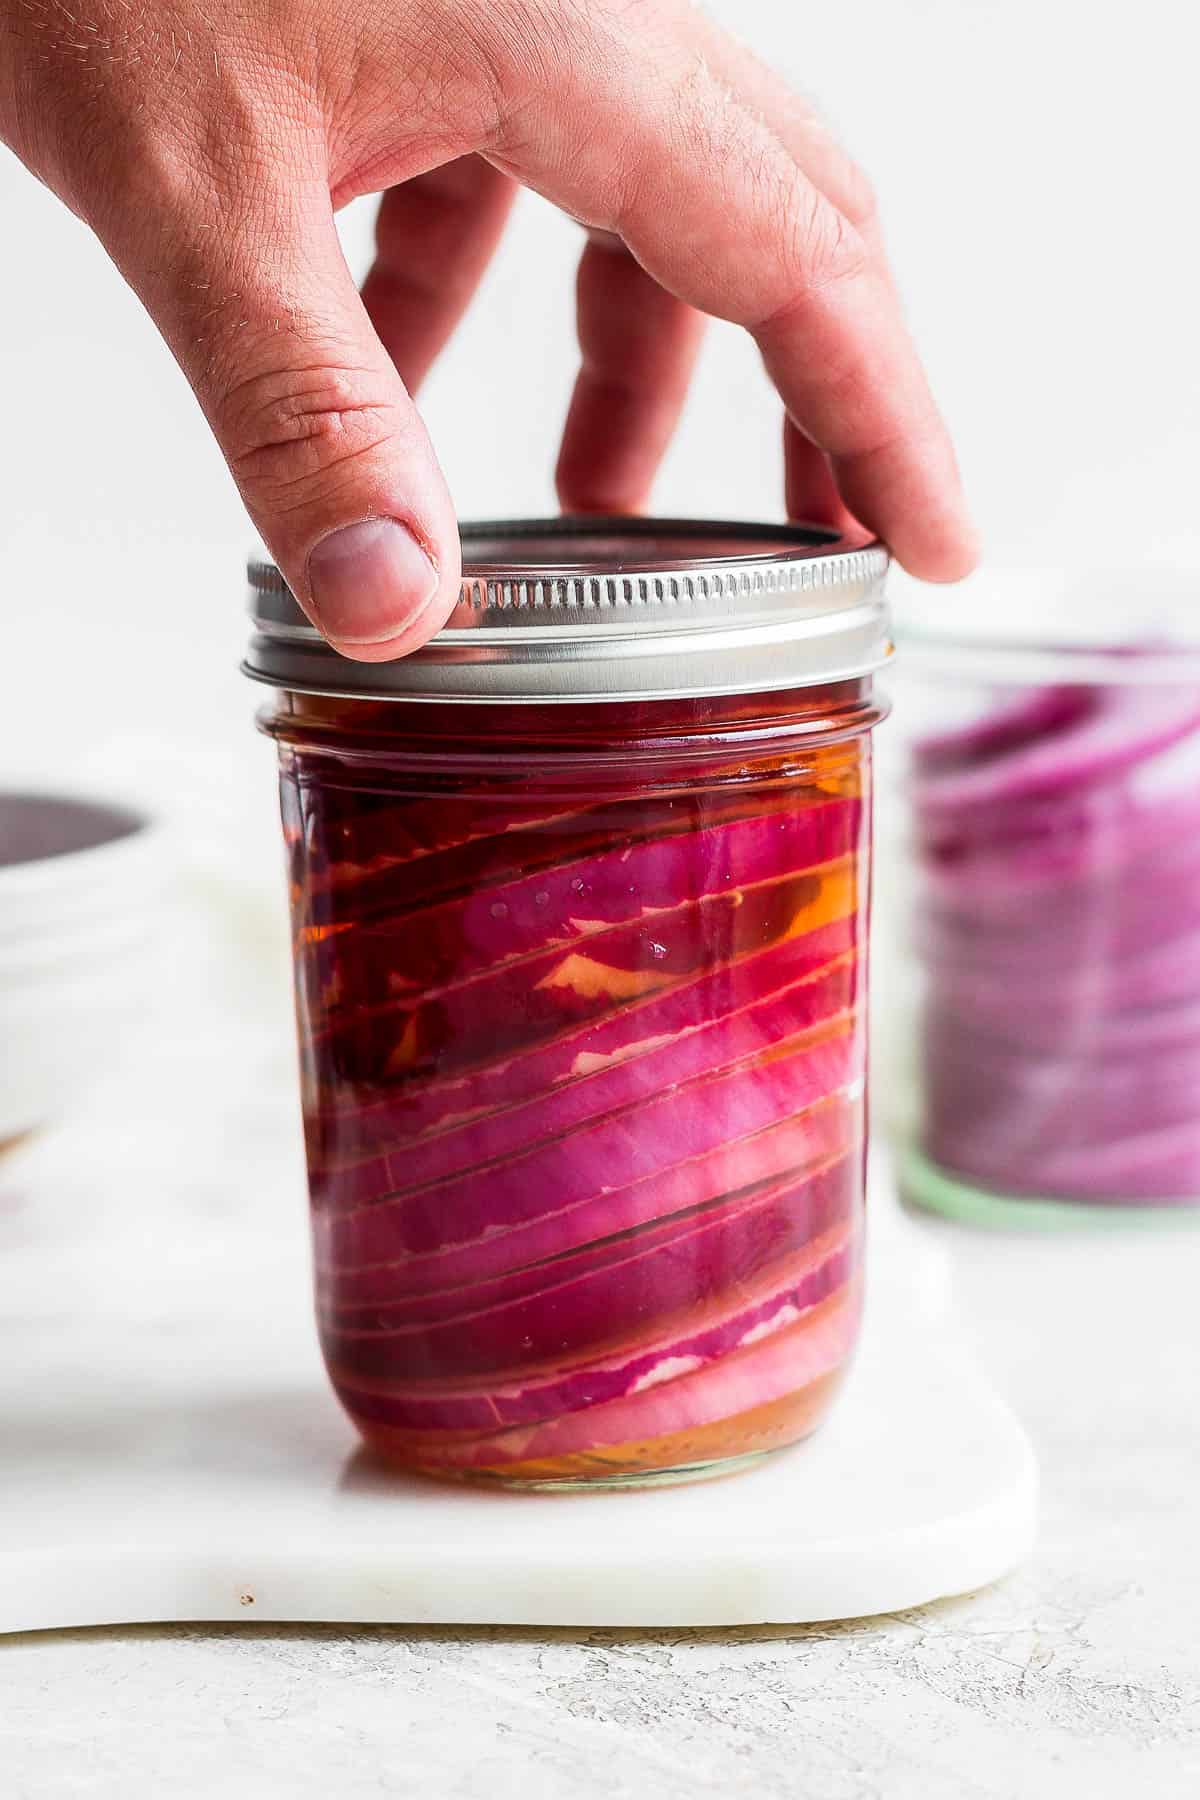 Placing a top on the jar of quick pickled onions.